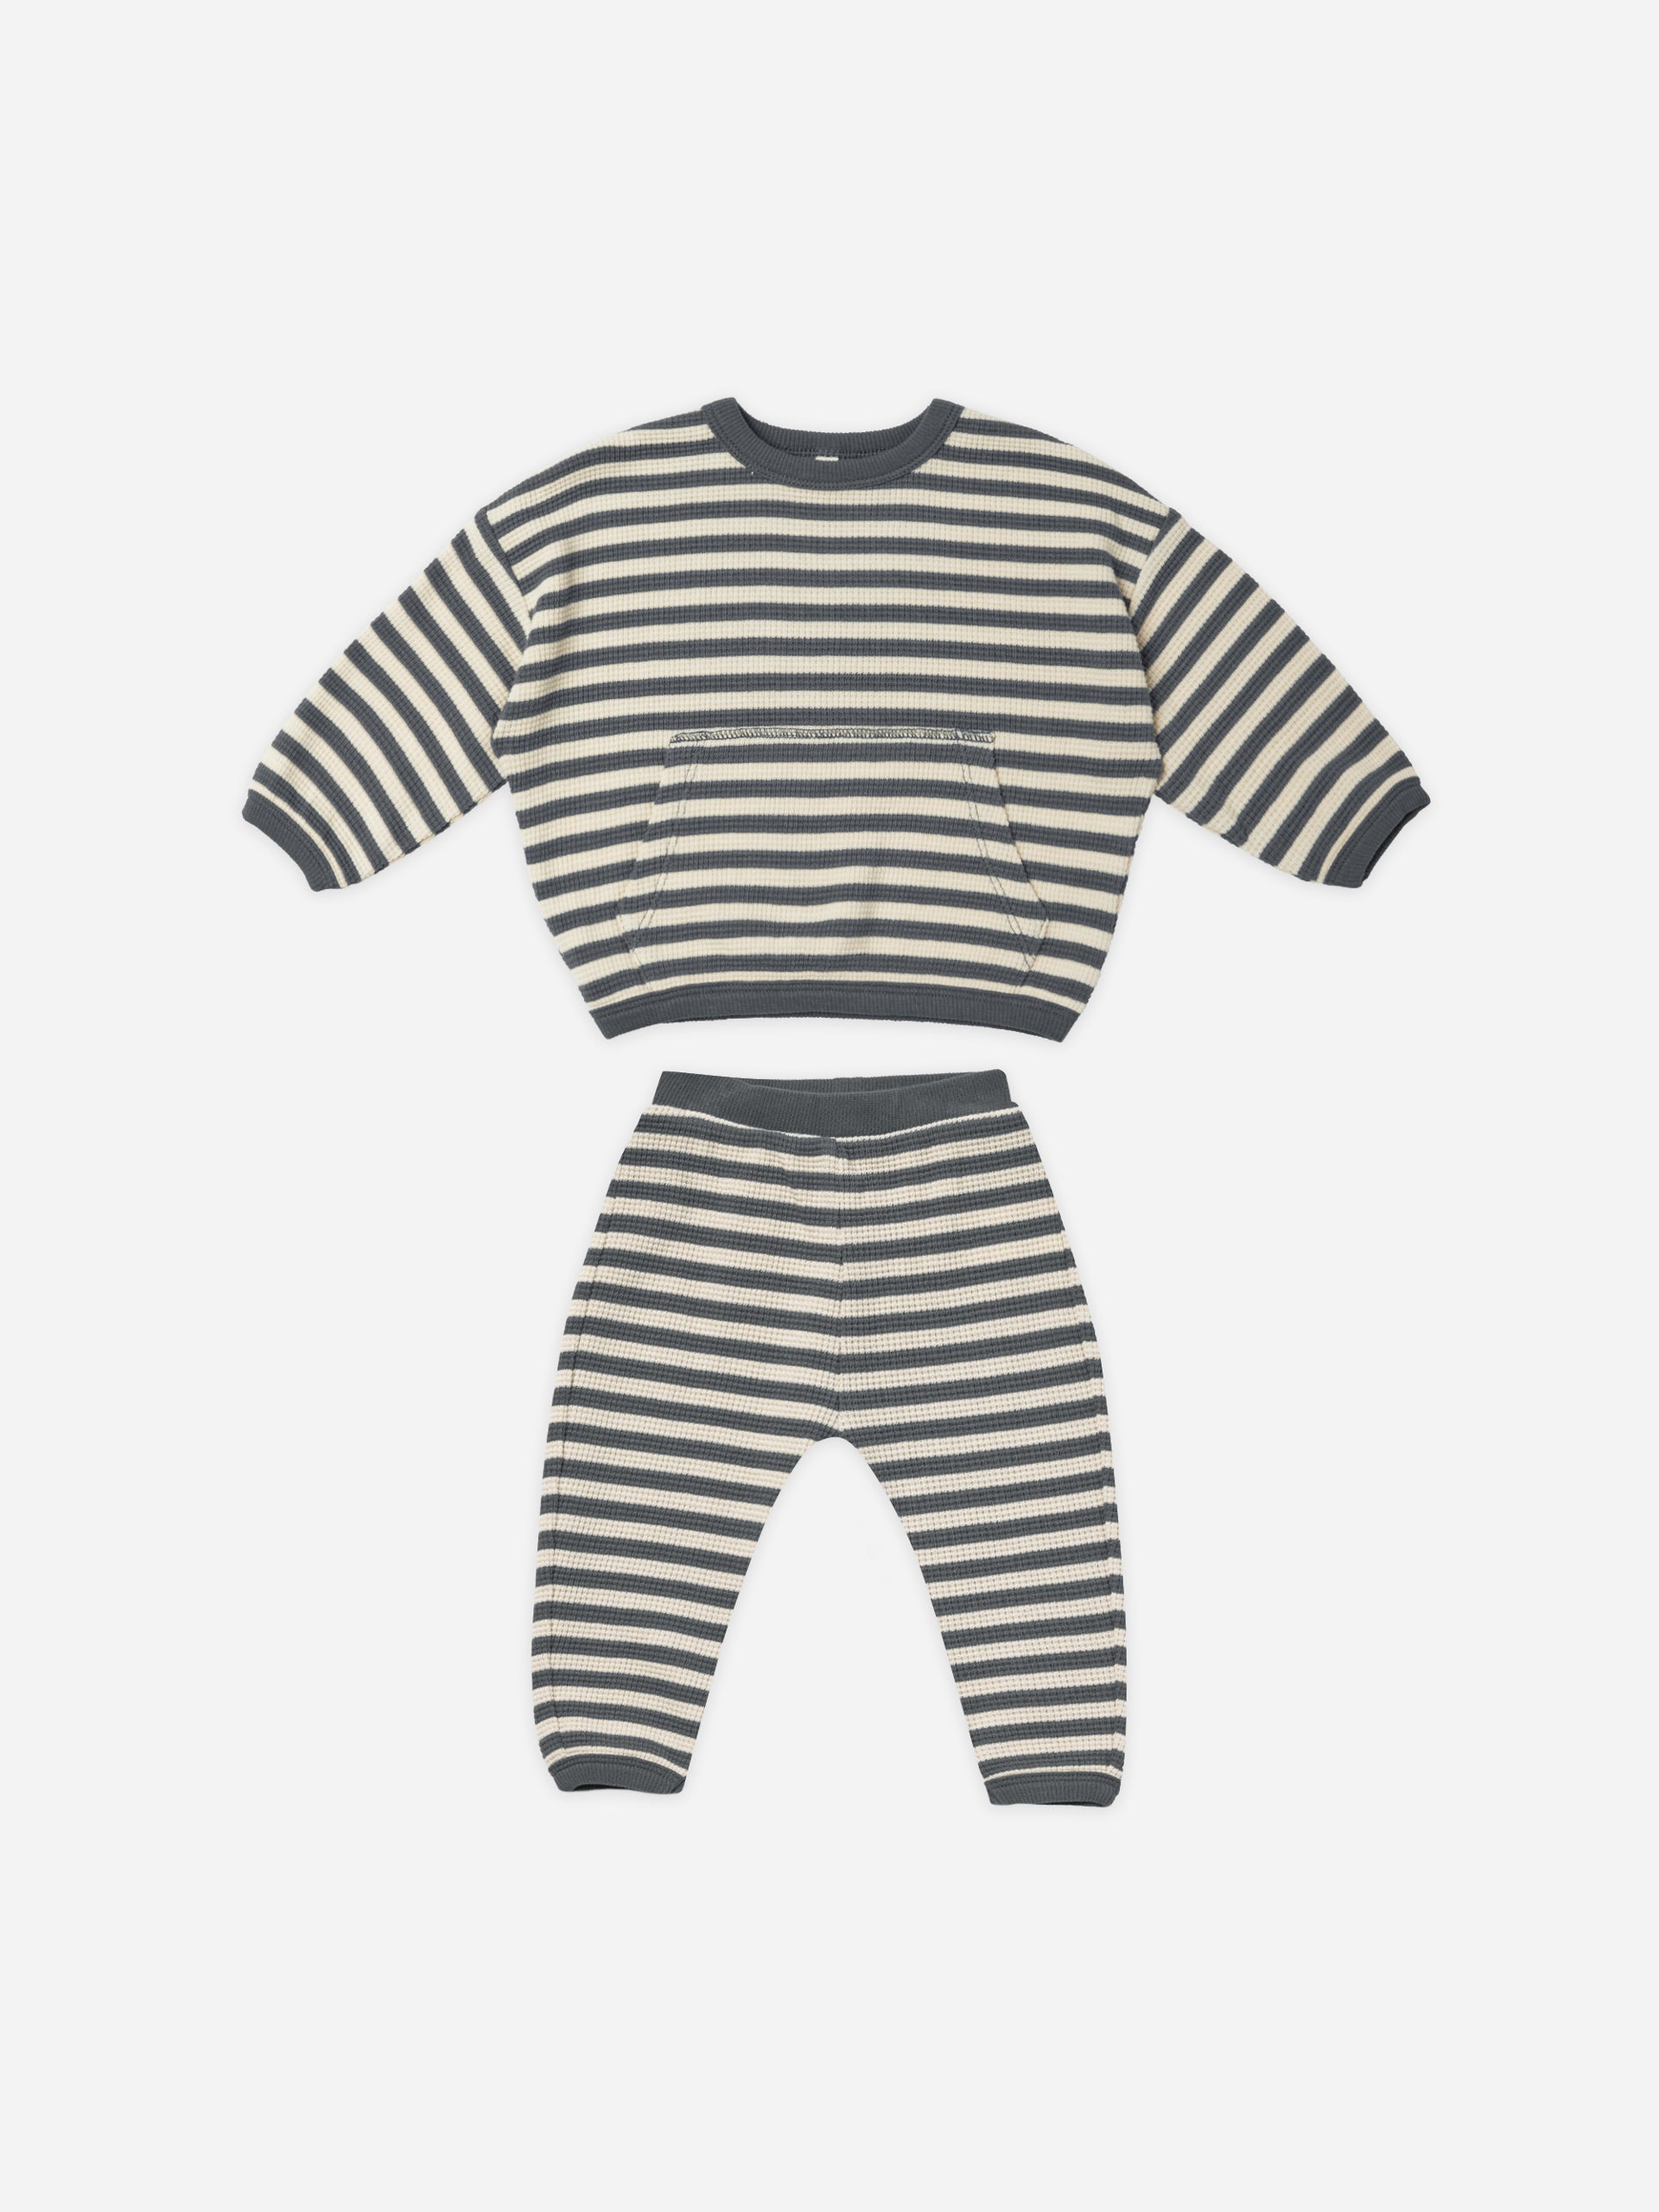 Waffle Sweater + Pant Set || Navy Stripe - Rylee + Cru | Kids Clothes | Trendy Baby Clothes | Modern Infant Outfits |